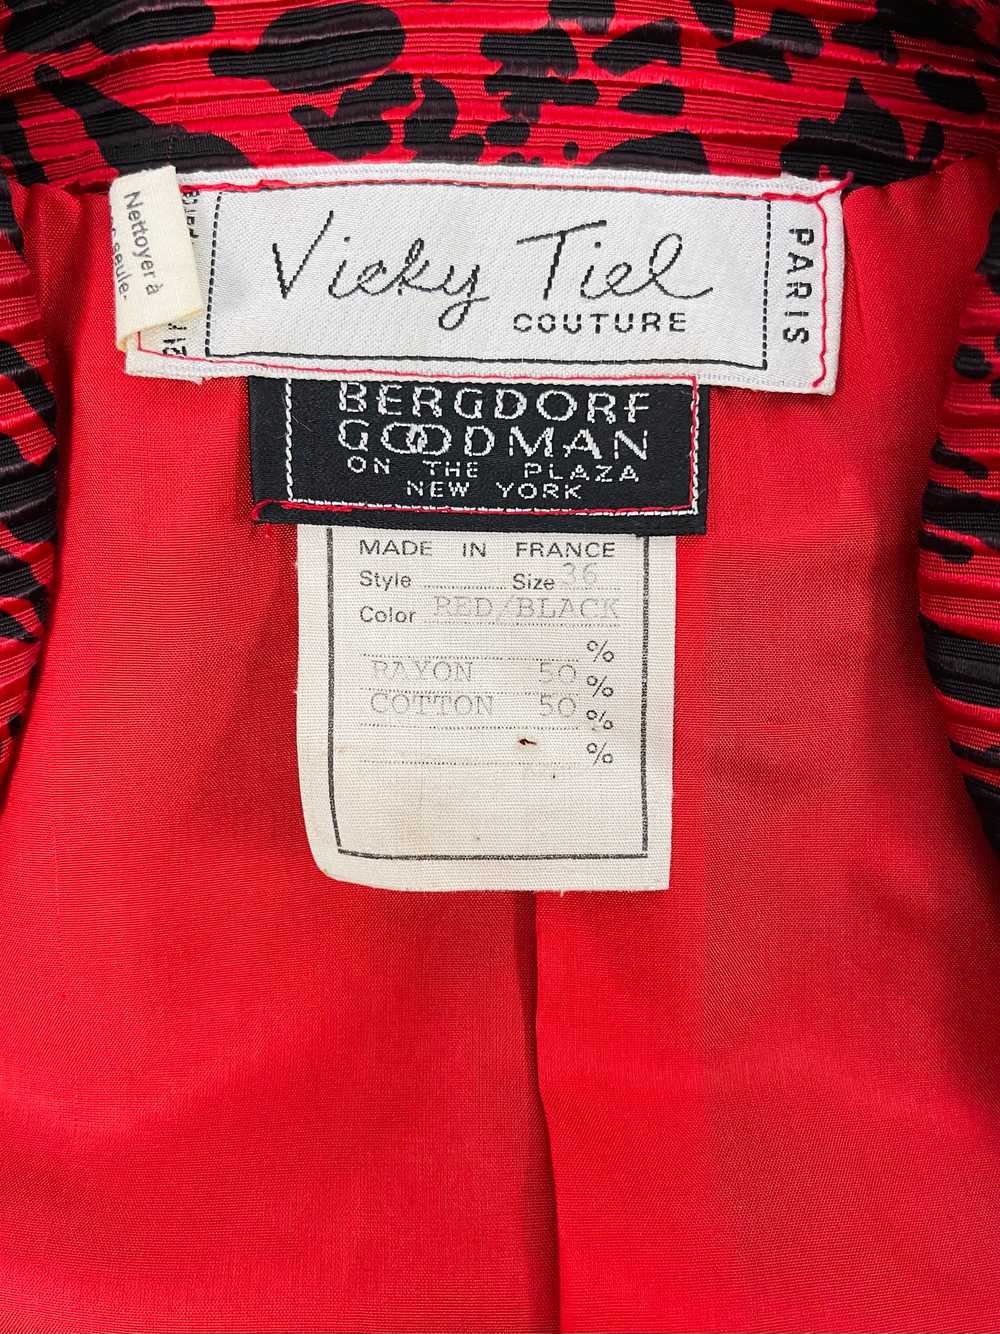 1980s jacket by Vicky Tiel Couture Made In Paris - image 5